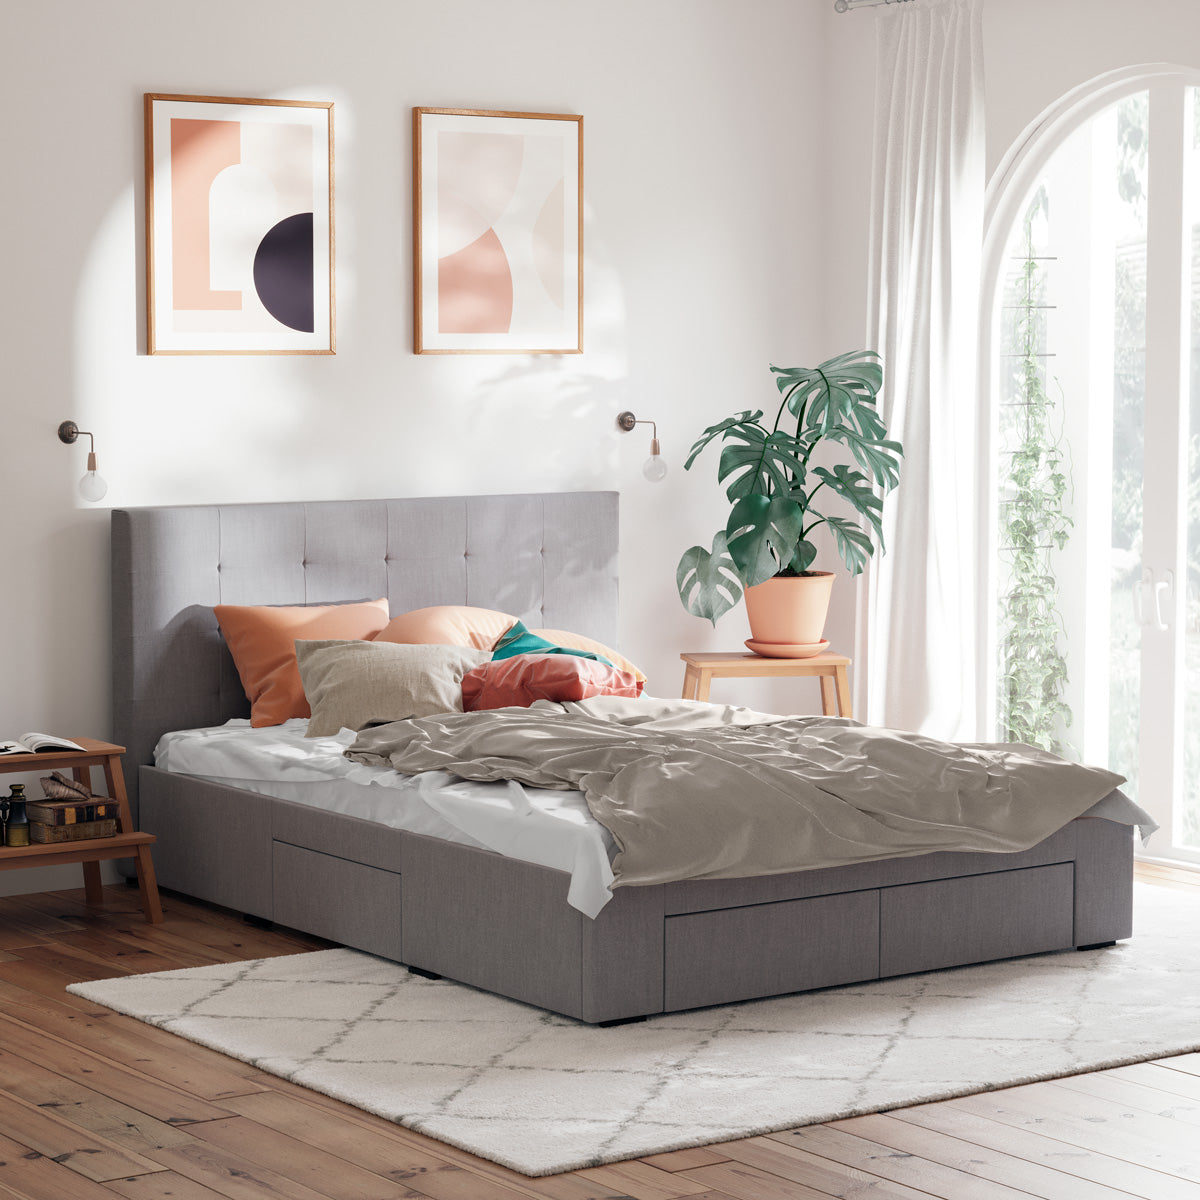 Grey Audrey Storage Bed Frame with Heston Bedside Tables Package